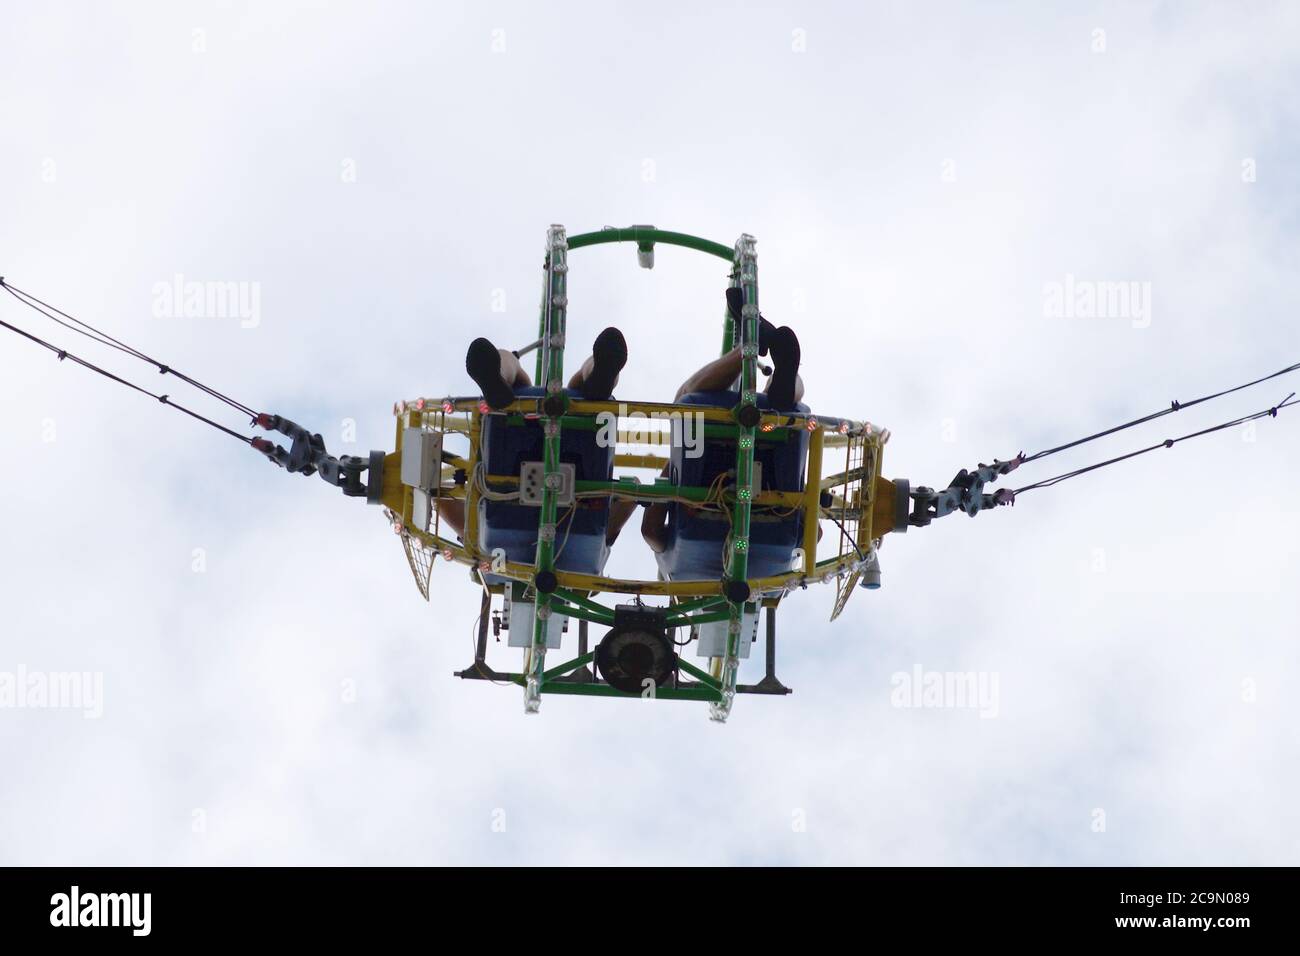 Varna, Bulgaria - June, 26, 2020: two people on the bungee ride bottom view. Stock Photo